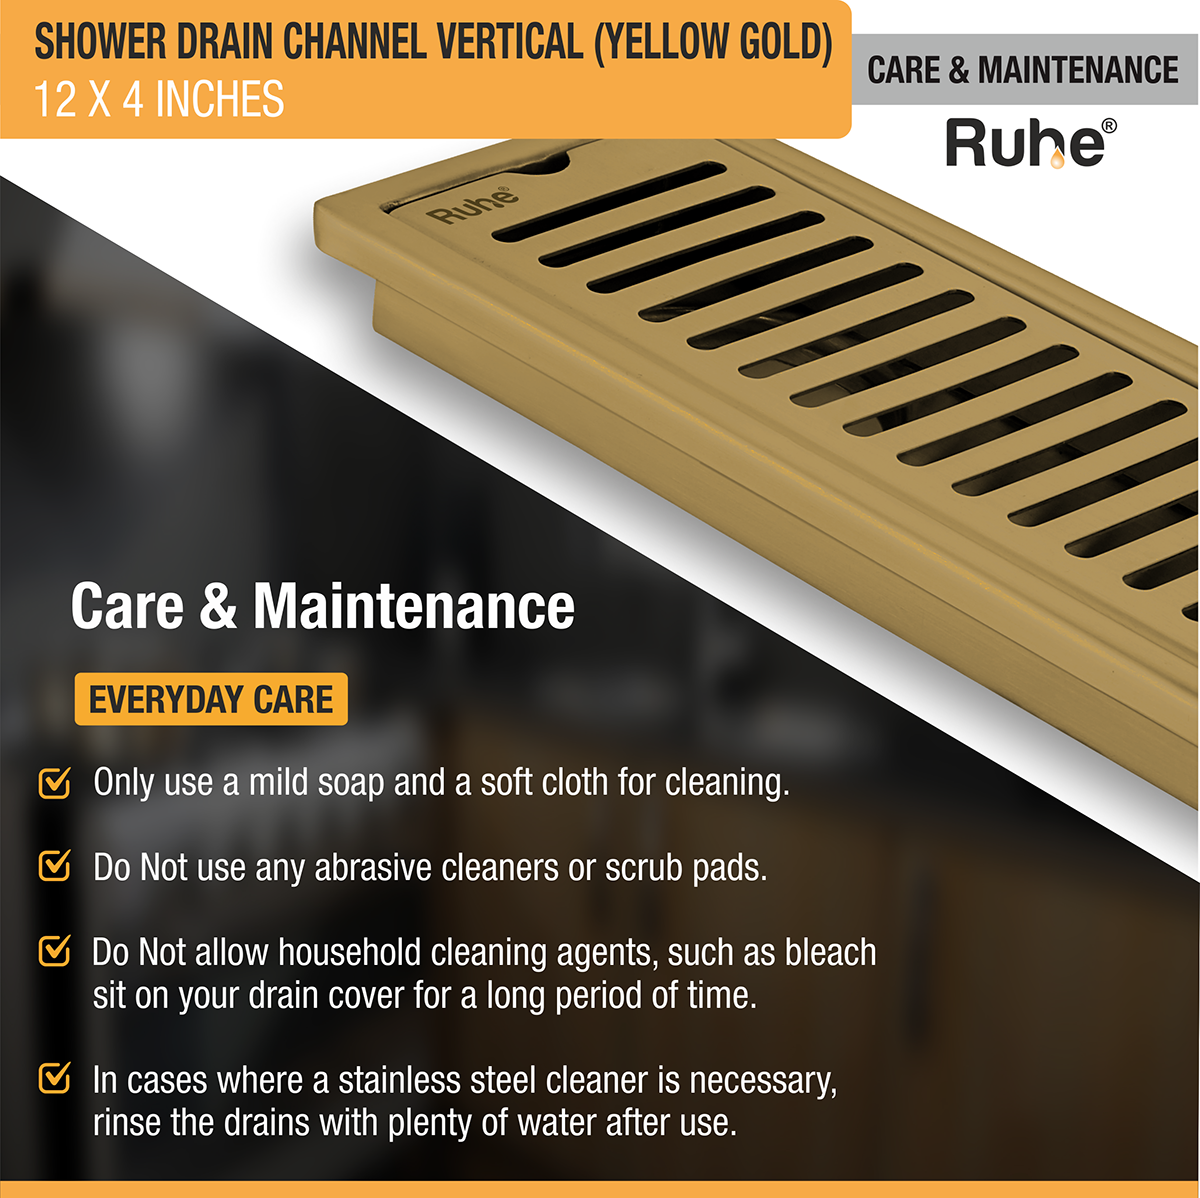 Vertical Shower Drain Channel (12 x 4 Inches) YELLOW GOLD care and maintenance